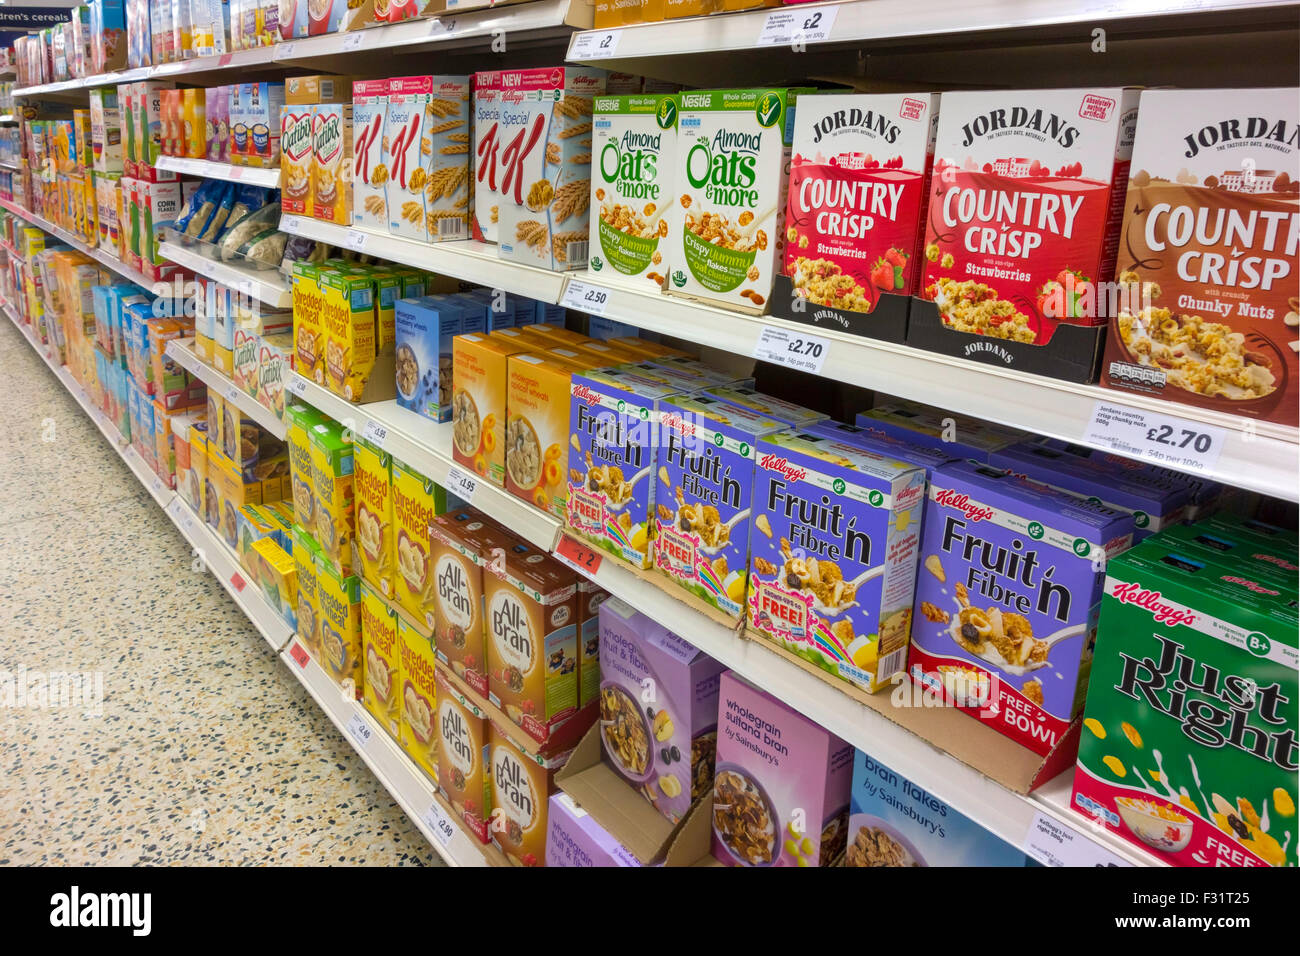 Sainsbury's Supermarket in North Yorkshire England UK display of Breakfast Cereals on shelves Stock Photo